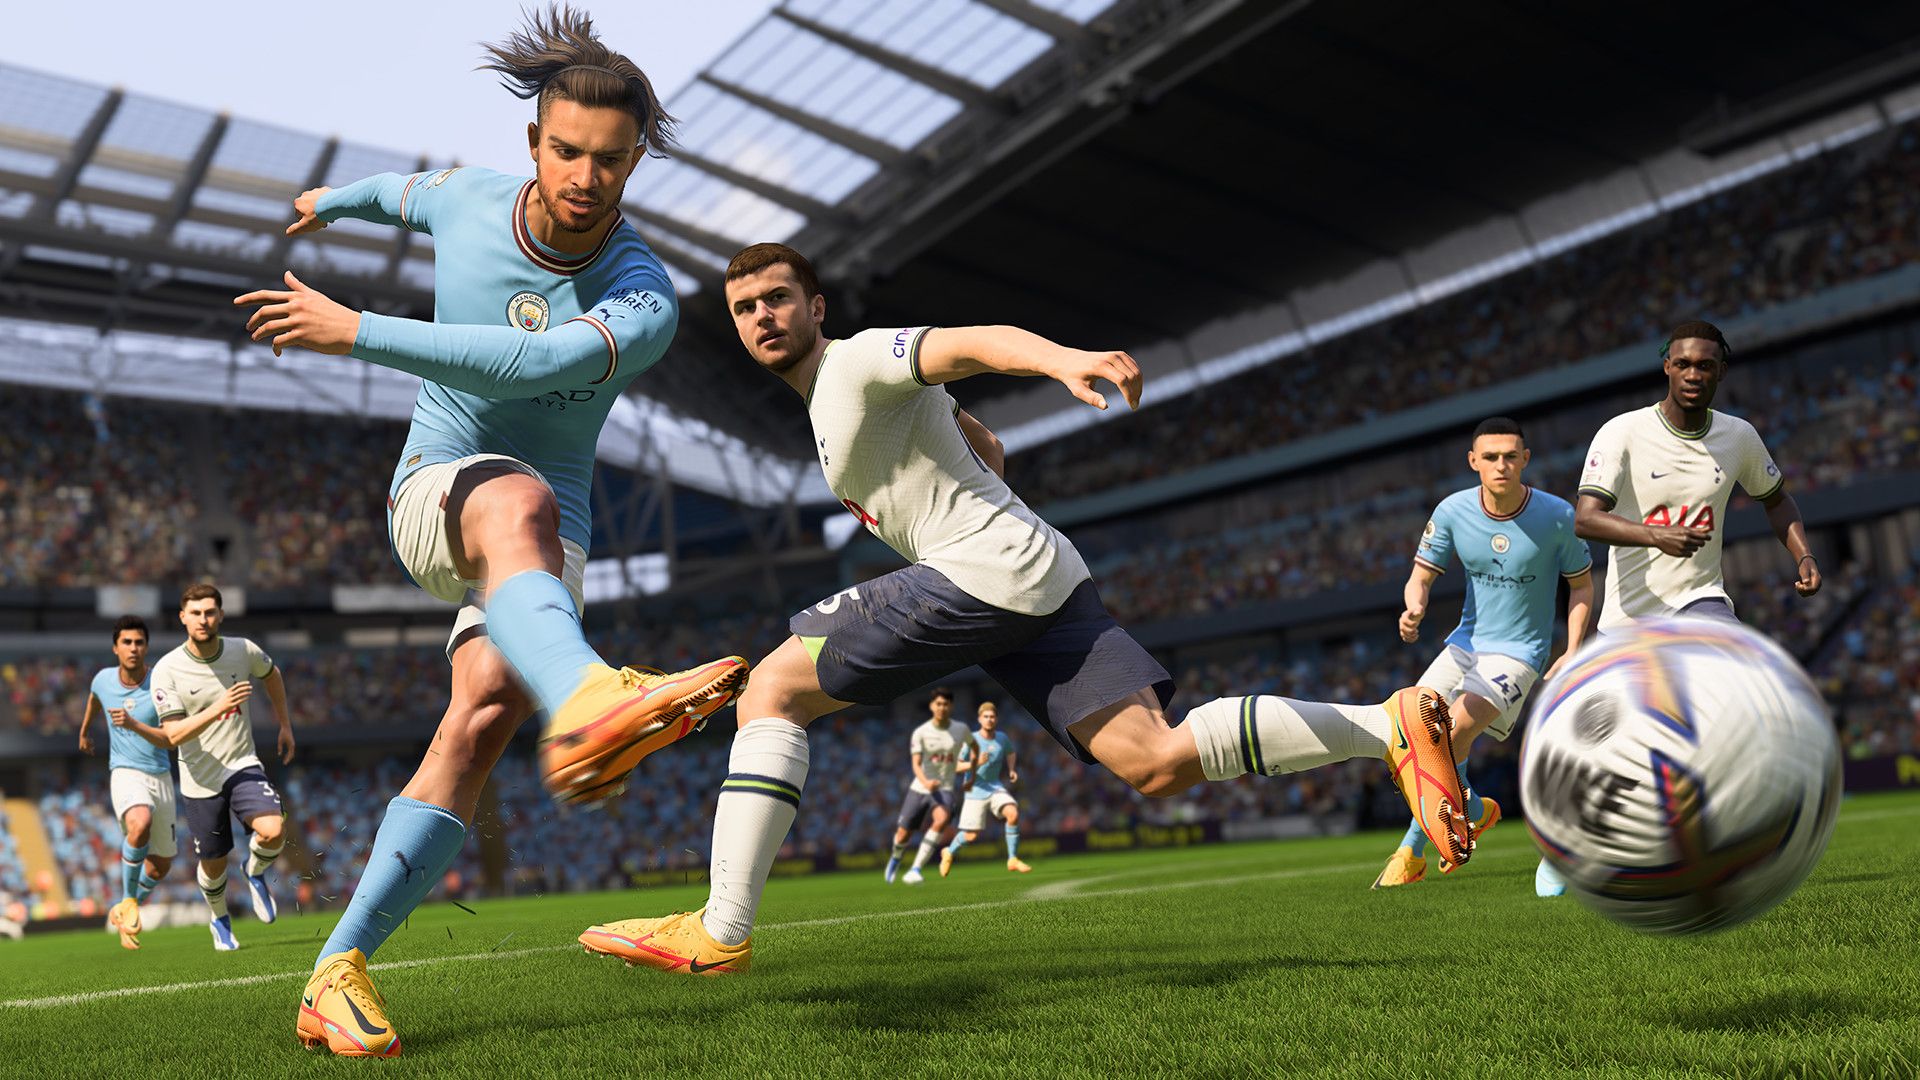 How to get FIFA 23 beta?